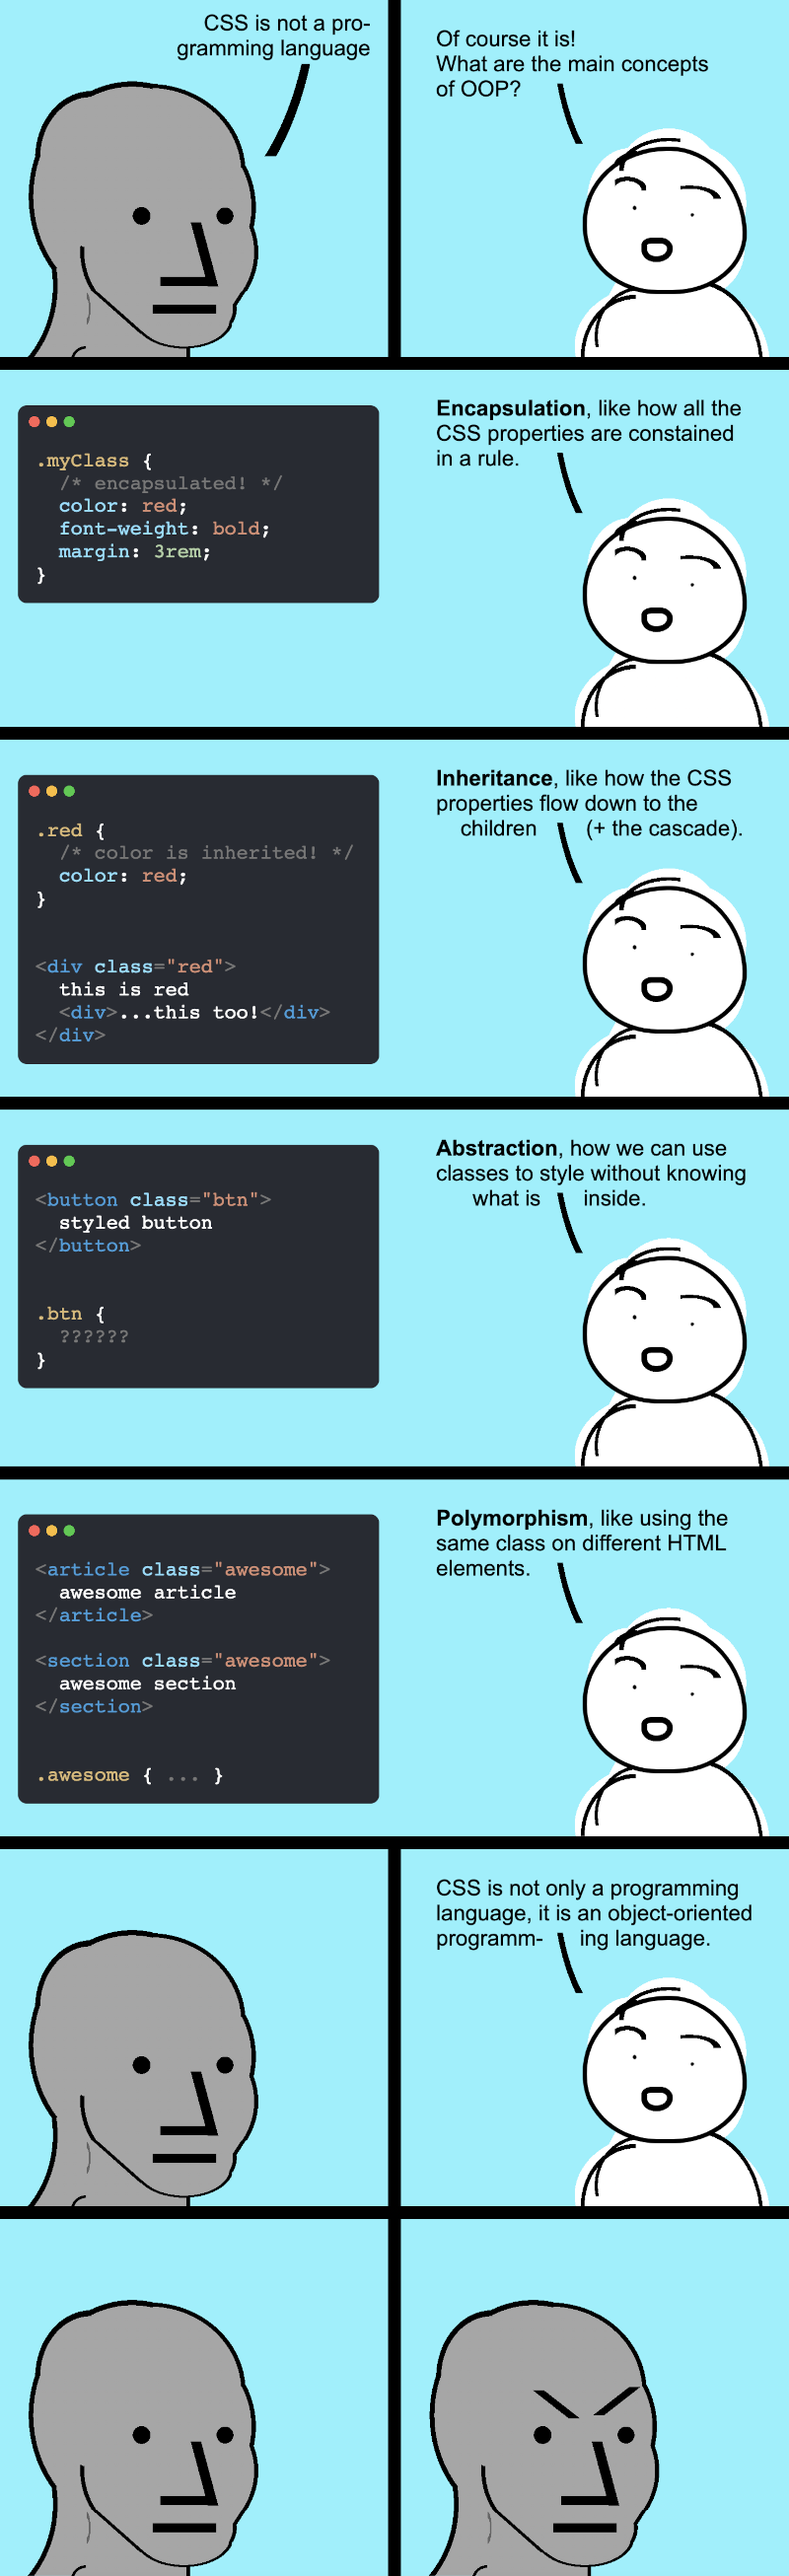 Modified version of the Angry Wojak meme showing two people talking. The first panel shows a person saying 'CSS is not a programming language'. The second panel has another person replying 'Of course it is! What are the main concepts of OOP?' Then proceeds to 'explain' how CSS 'has' encapsulation, inheritance, abstraction, and polymorphism, so it should be considered an object-oriented programming language. The last panels show the first person, first normal (without saying anything) then angry.